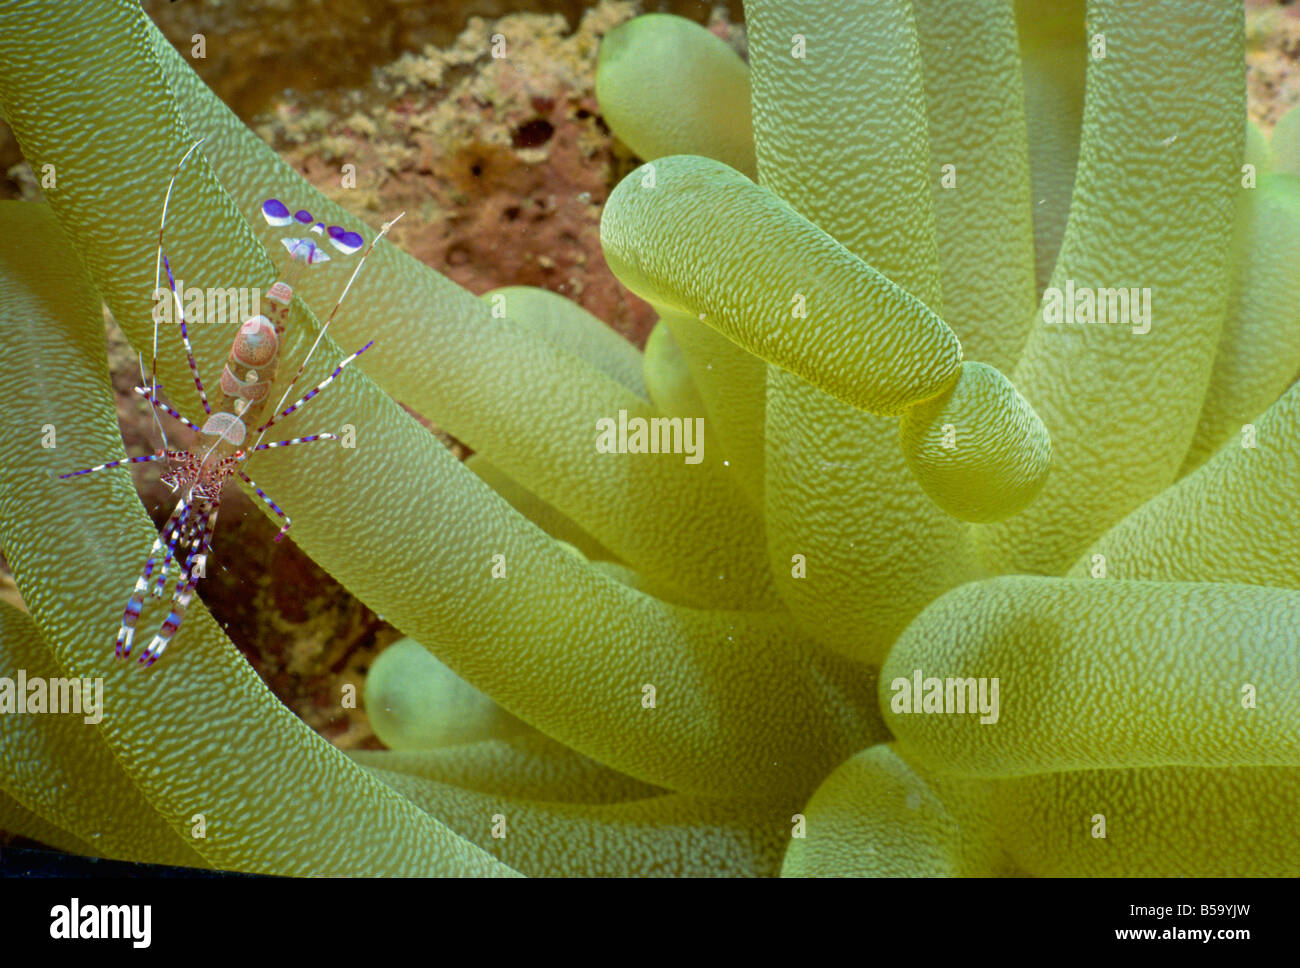 Purple and white shrimp on yellow tentacle coral, Honduras, Central America Stock Photo